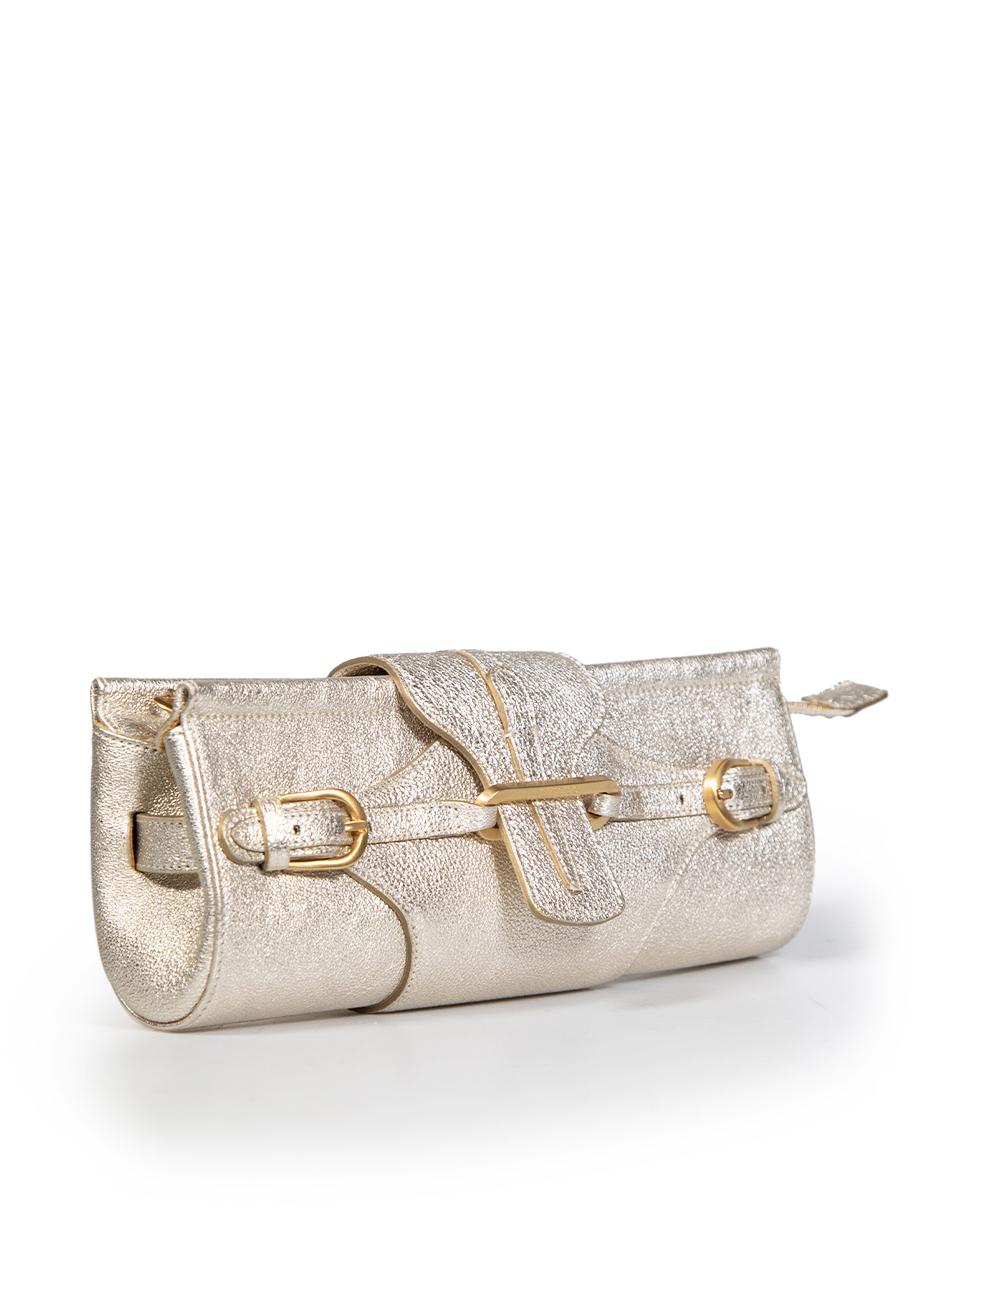 CONDITION is Very good. Minimal wear to wristlet is evident. Minimal wear to front opening where leather edge has creased and some scratches to the zipper on this used Jimmy Choo designer resale item.
 
 
 
 Details
 
 
 Gold
 
 Leather
 
 Mini